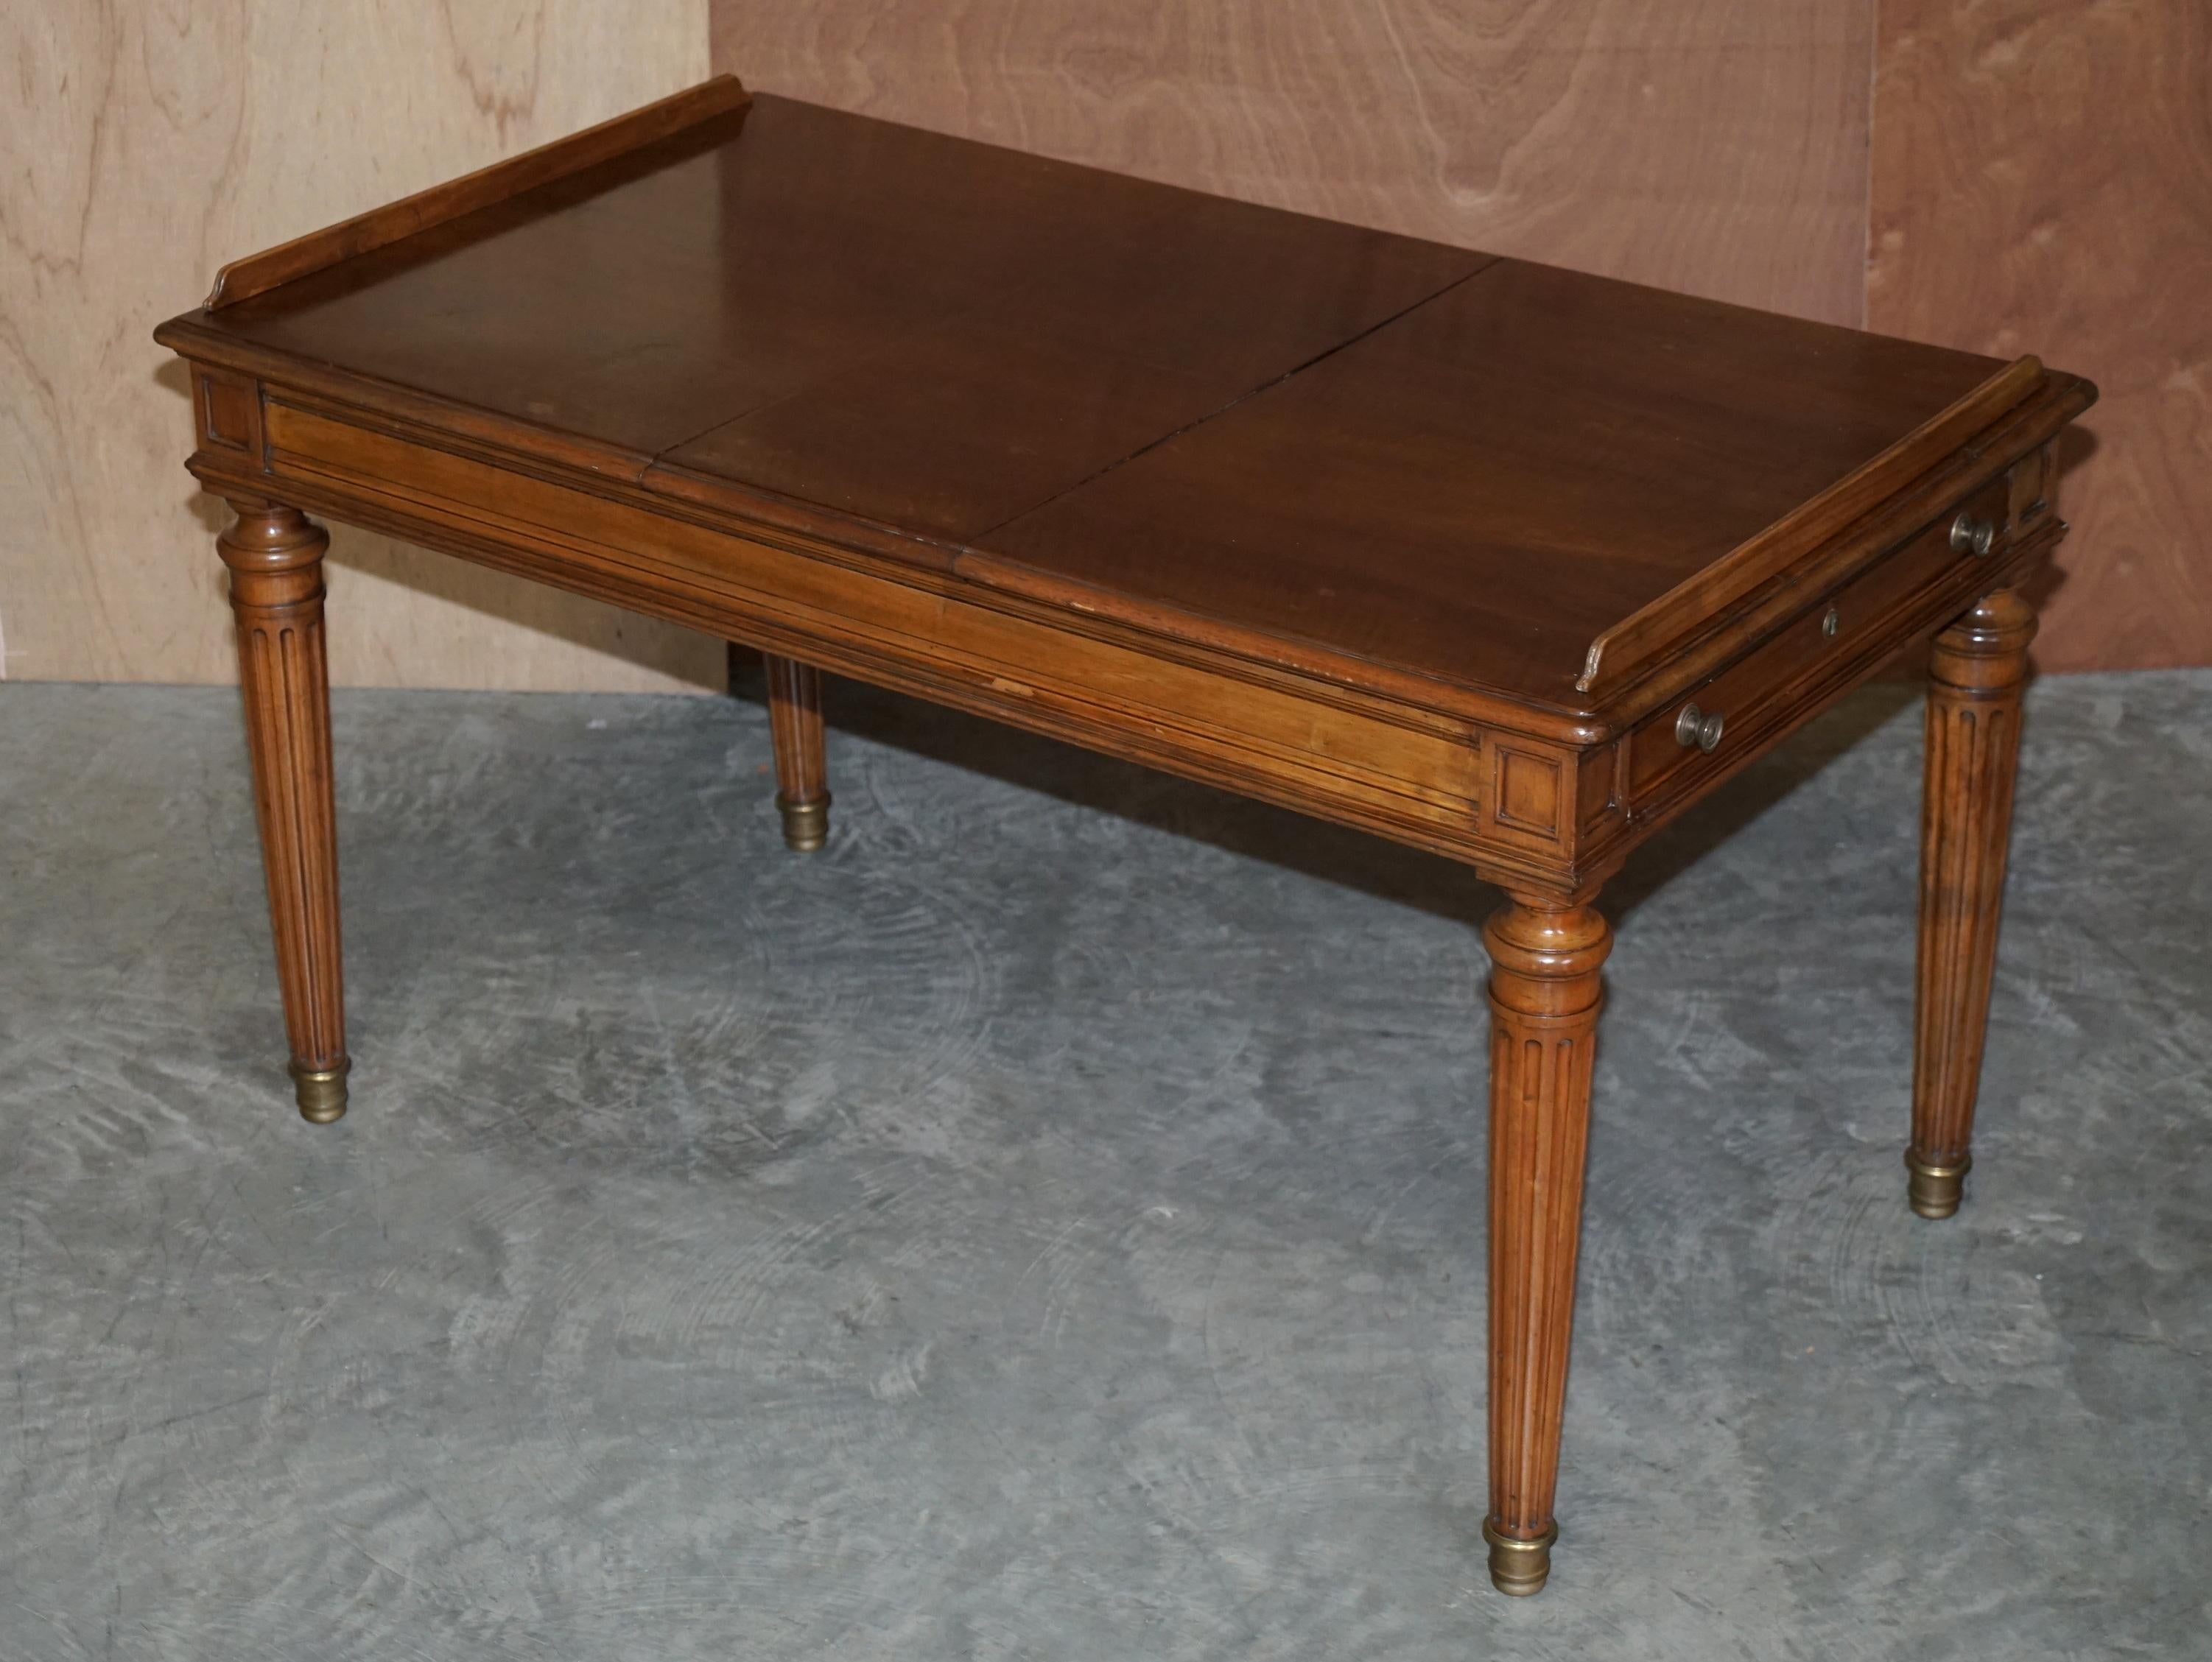 Rare Antique circa 1860 Library Writing Table Desk with Twin Writing Slopes For Sale 9